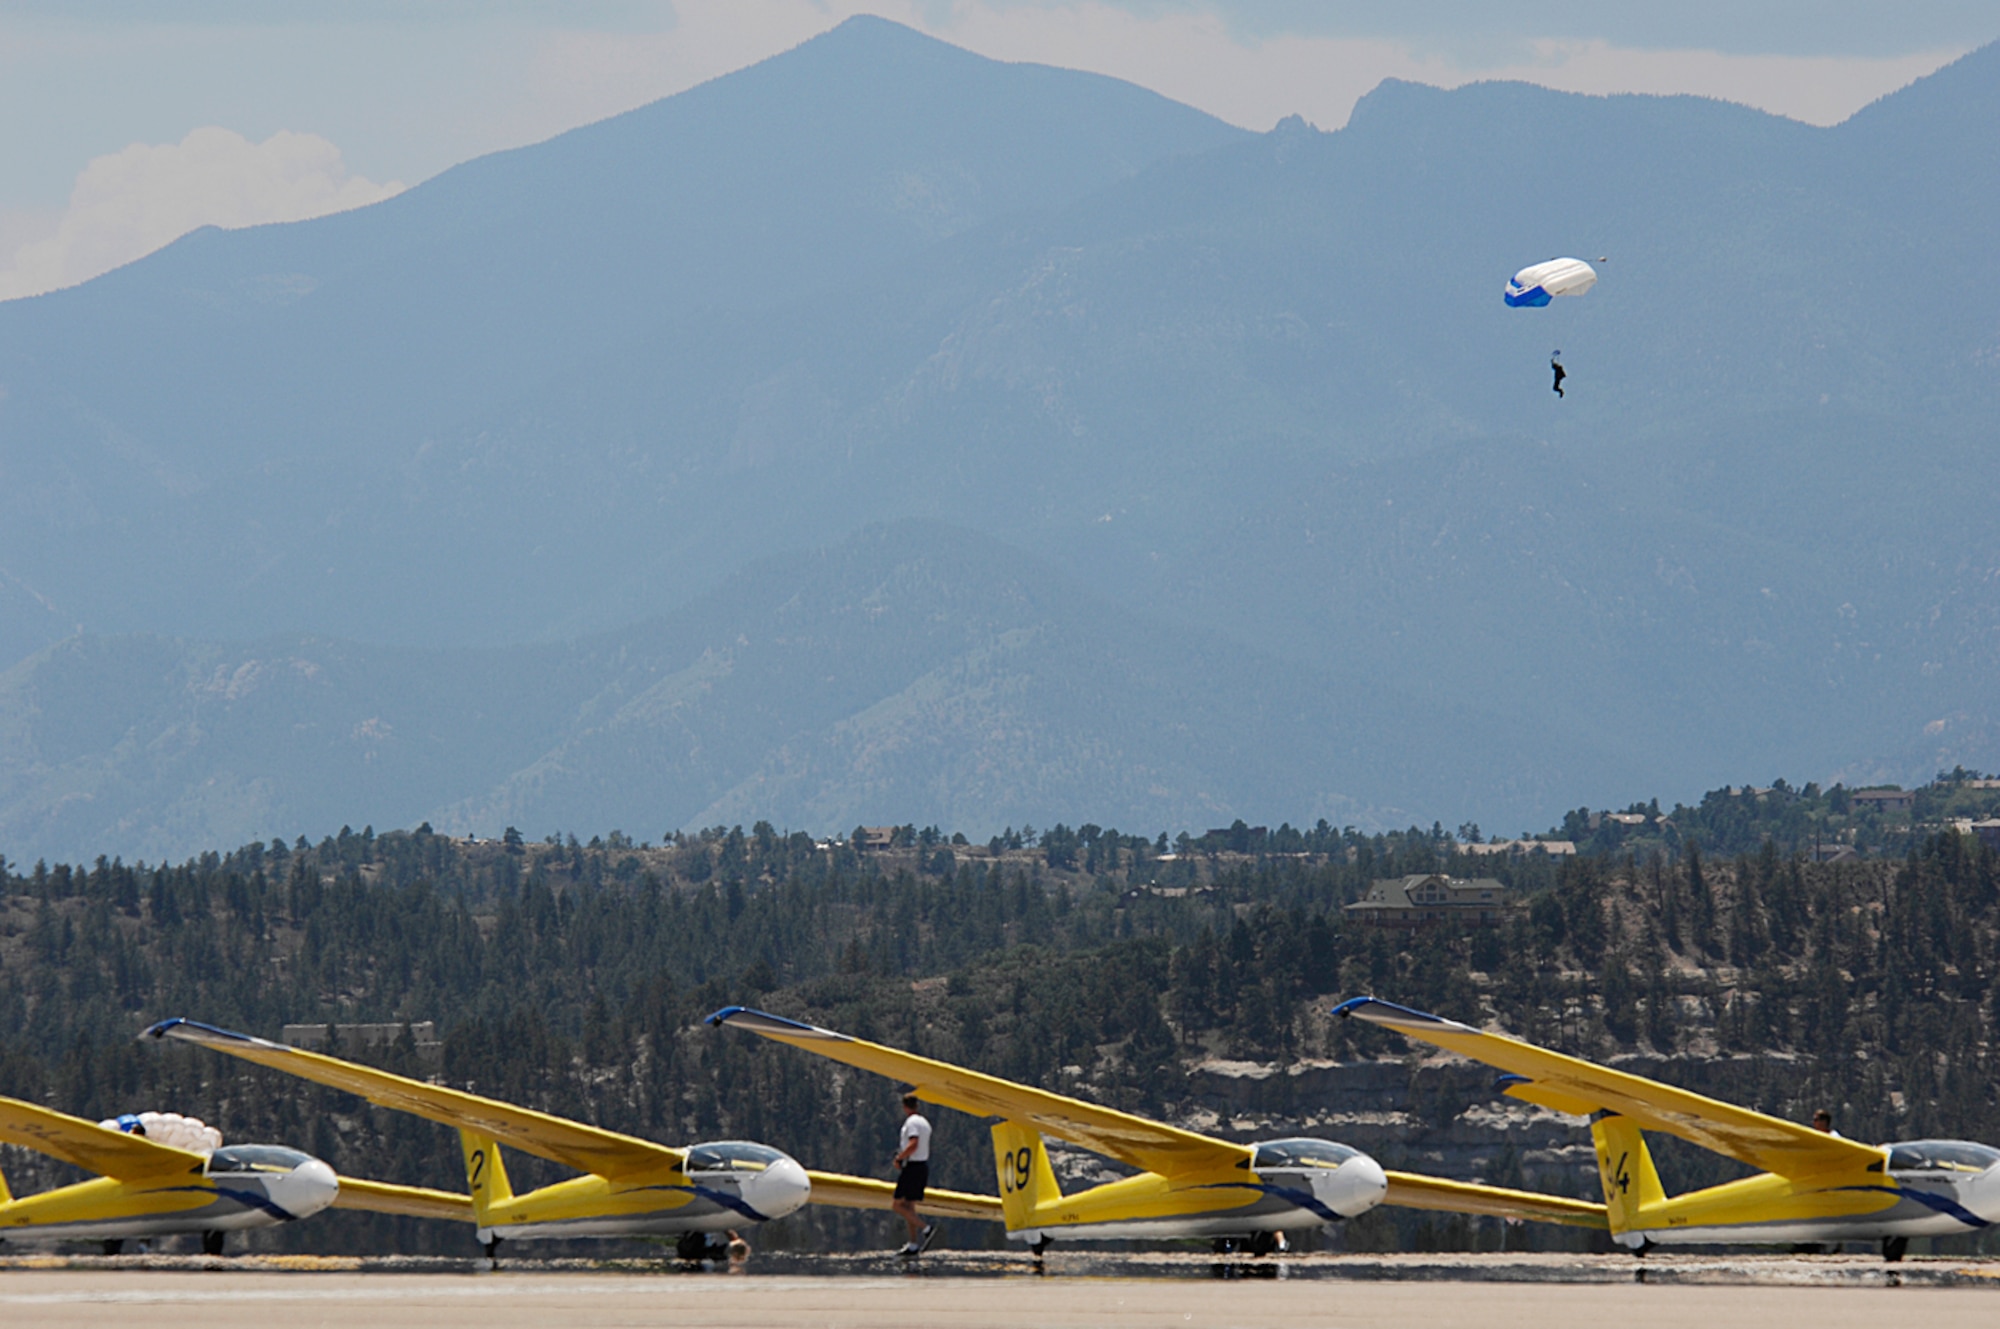 With cadets parachuting out of airplanes and flying gliders, the skies above the U.S. Air Force Academy are nearly always buzzing with activity. Despite a crowded airfield and challenging weather, the 306th Flying Training Group sports an excellent safety record. (photo by Tech. Sgt. Matthew Hannen)